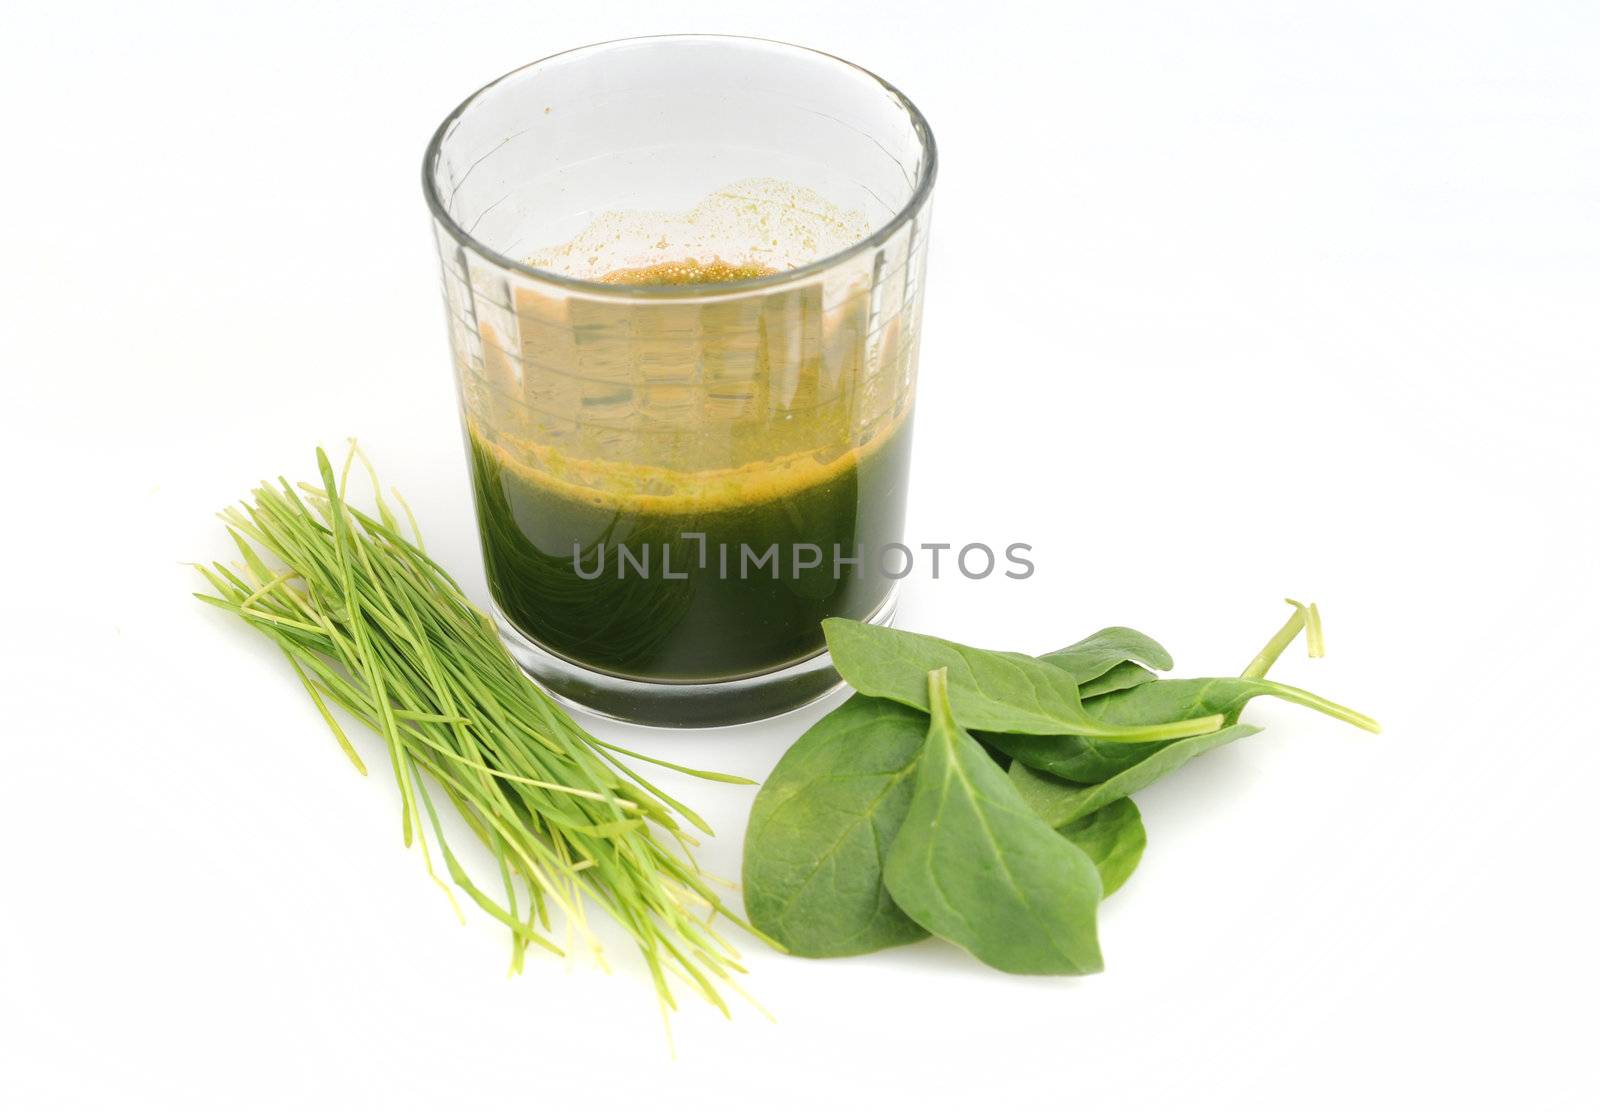 A healthy green juice or drink made with spinach and wheat grass